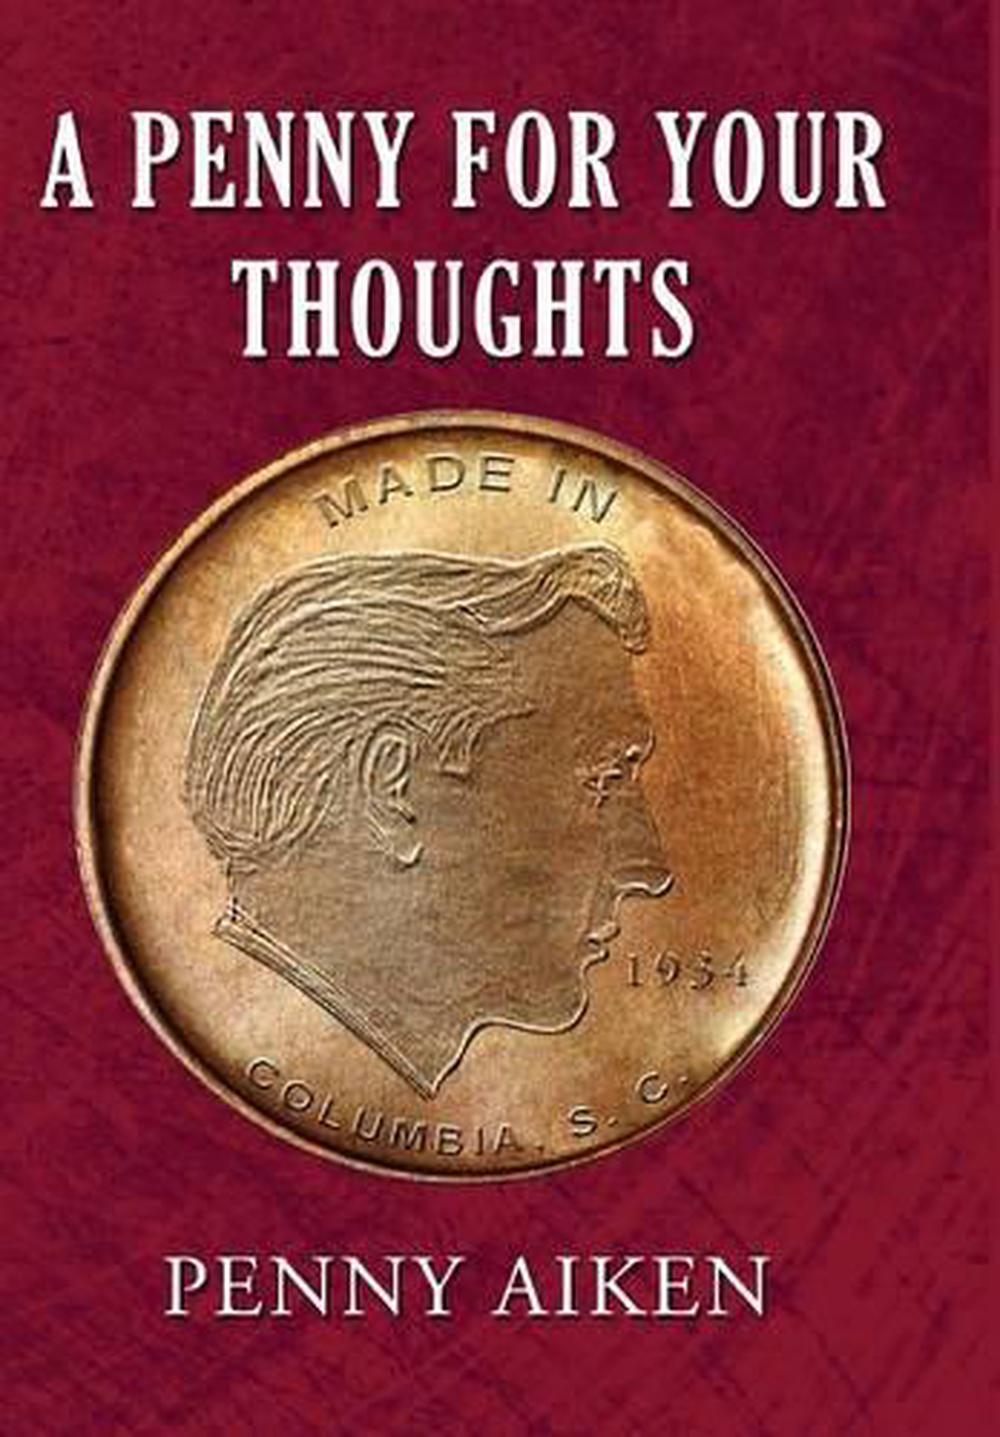 a penny for your thoughts productions